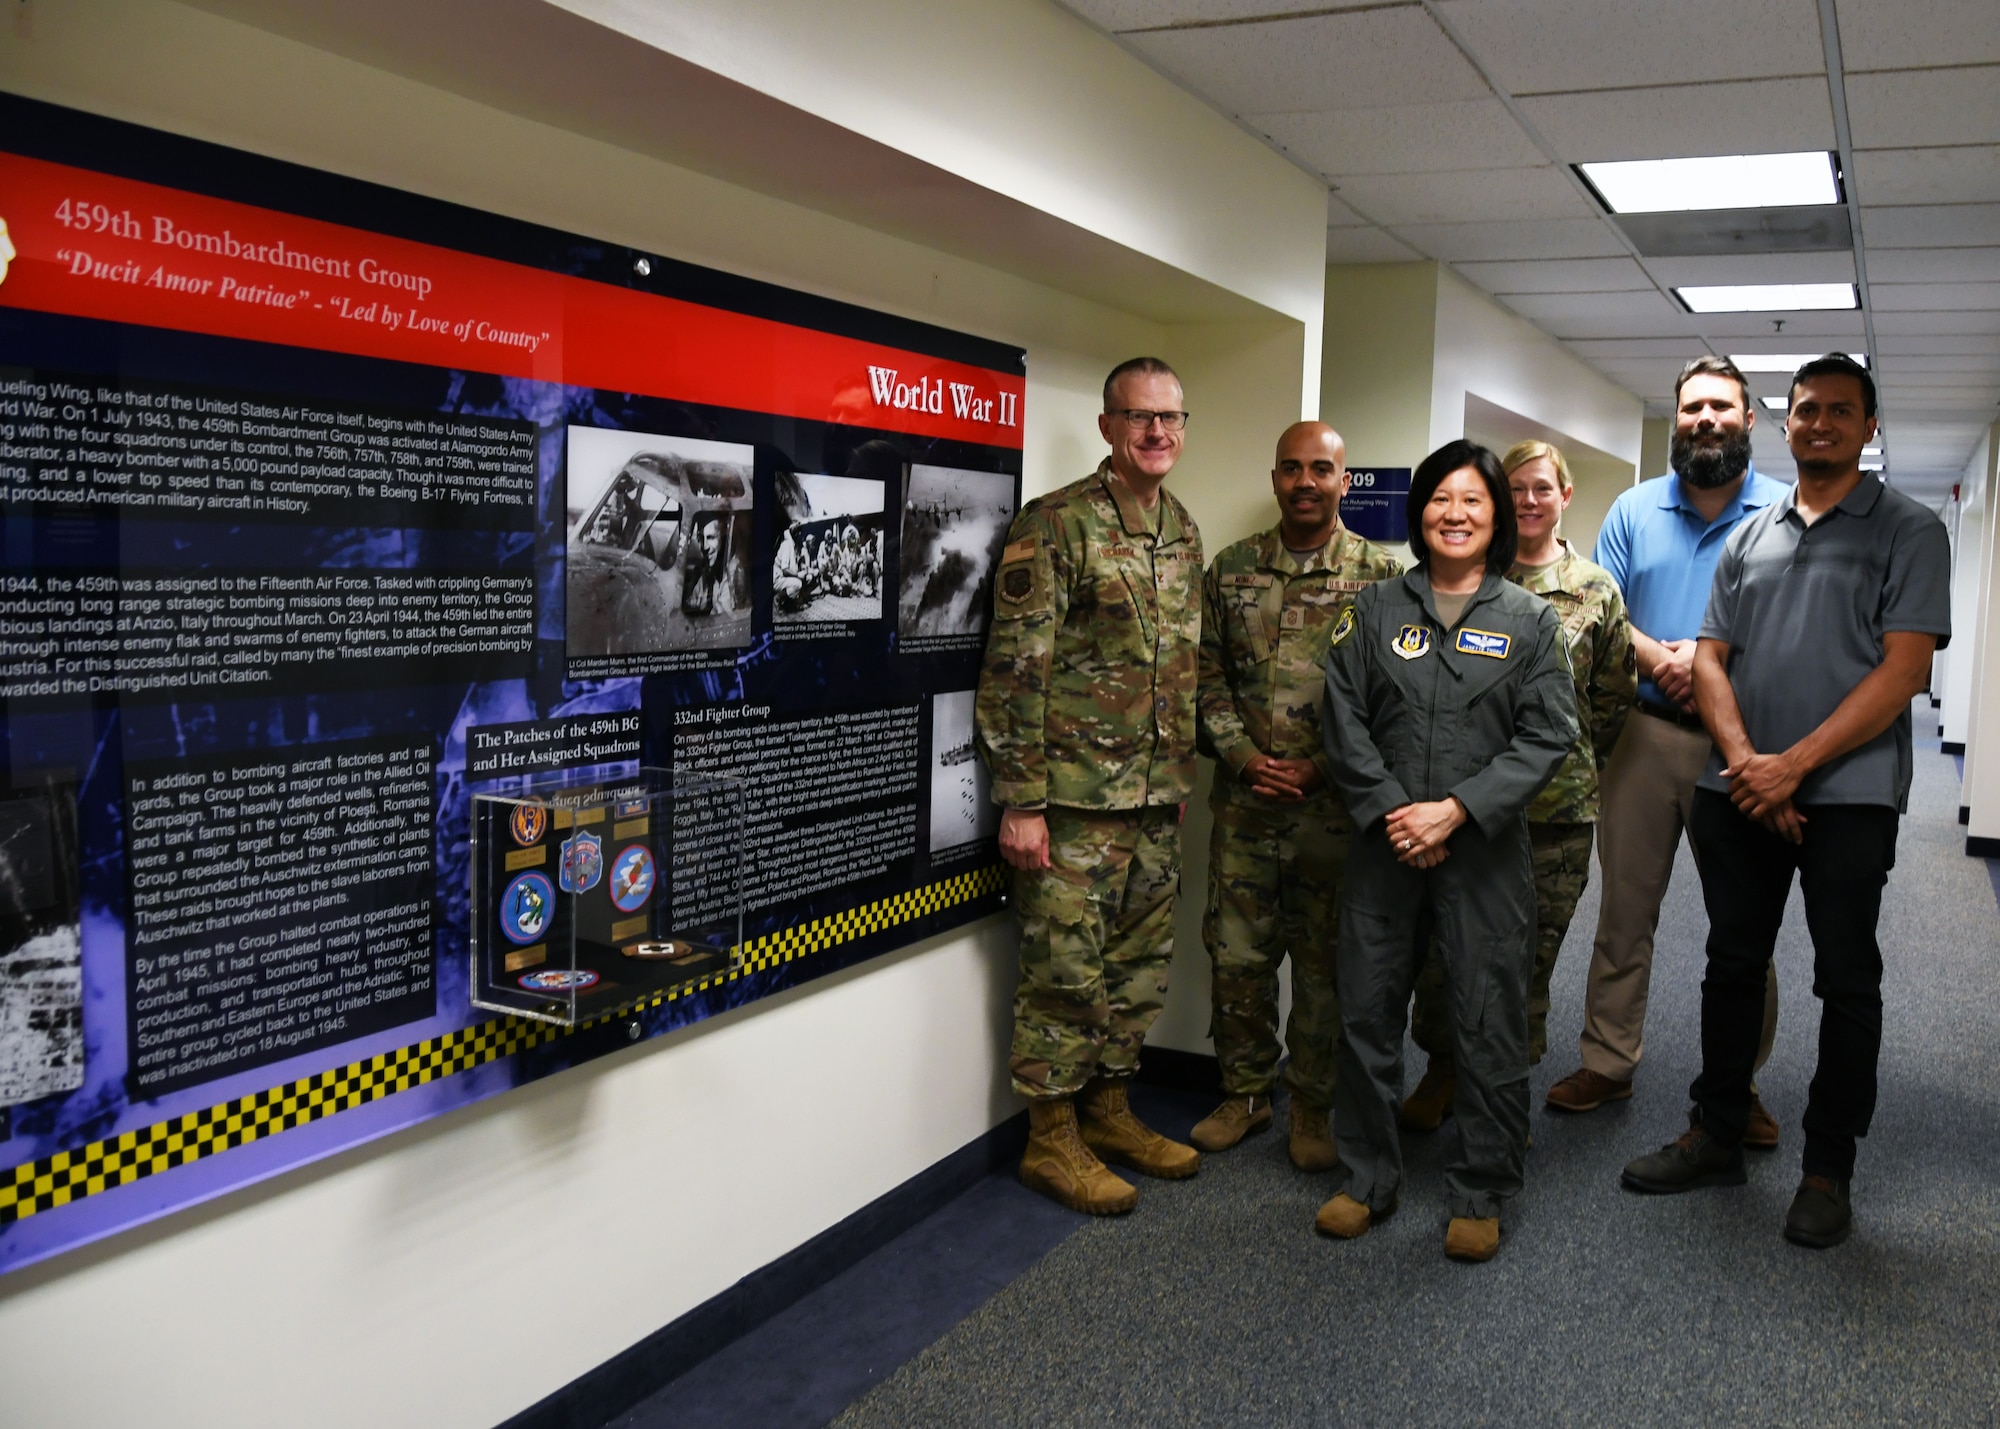 The 459th Air Refueling Wing’s leadership team gathers next to one of the headquarters’ new heritage panels designed by wing historian Julius Lacano (2nd from right), May 16, 2022. Lacano was recently awarded the Air Force Reserve Command Heritage Award for leading this project over the course of eight months. The historian designed the project as a way to educate servicemembers on the wing’s history that began in 1943. This project falls squarely in line with leadership’s goal to develop resilient, committed, combat-ready Airmen. The wing’s three inspiring historical displays can be viewed on the south hallway on the second floor of the Wing’s HQ.  (U.S. Air Force photo by Tech Sgt. Cierra Presentado)